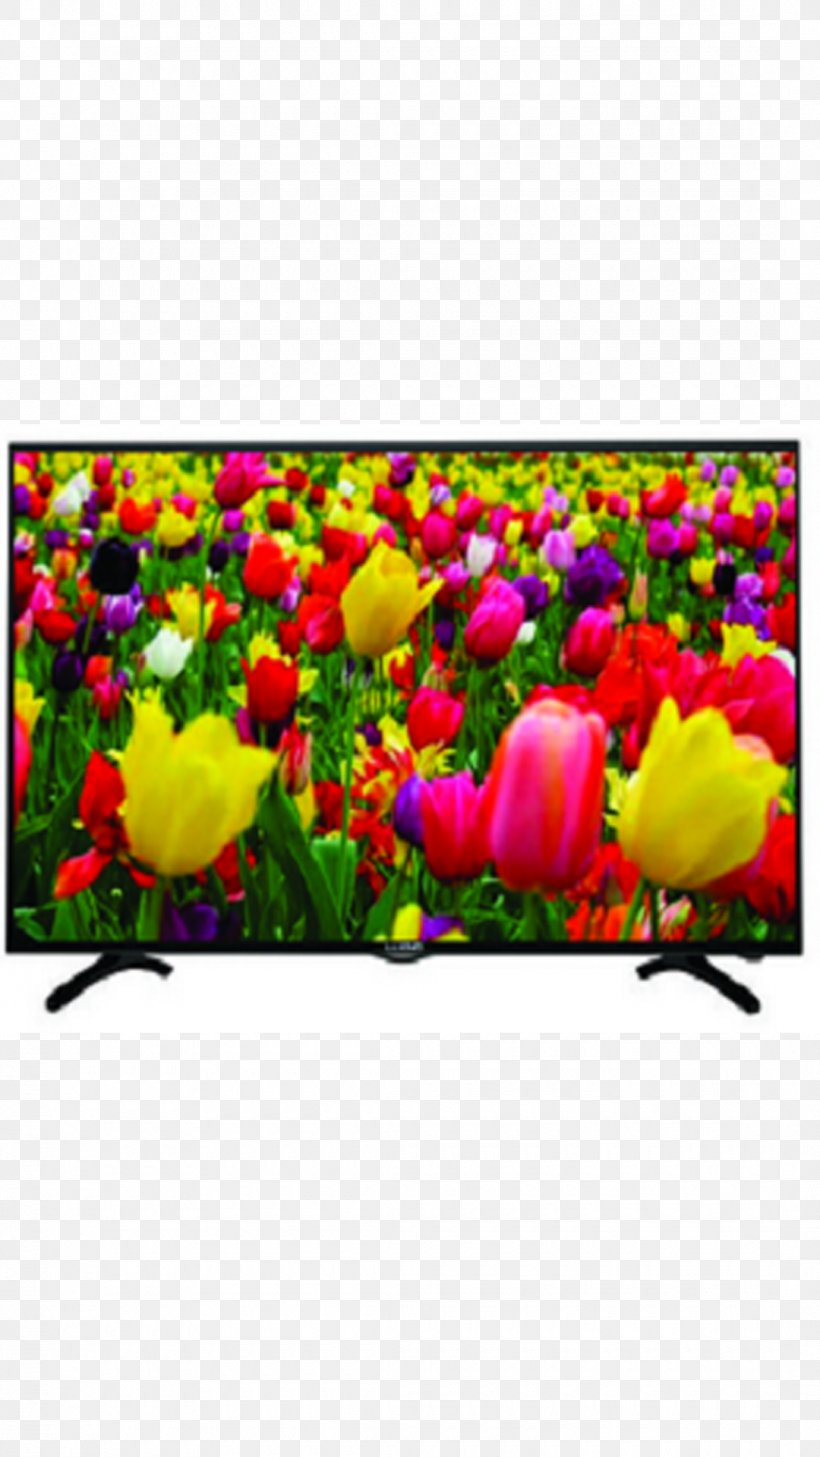 LED-backlit LCD High-definition Television HD Ready 1080p, PNG, 1080x1920px, Ledbacklit Lcd, Flower, Flowering Plant, Hd Ready, Hdmi Download Free